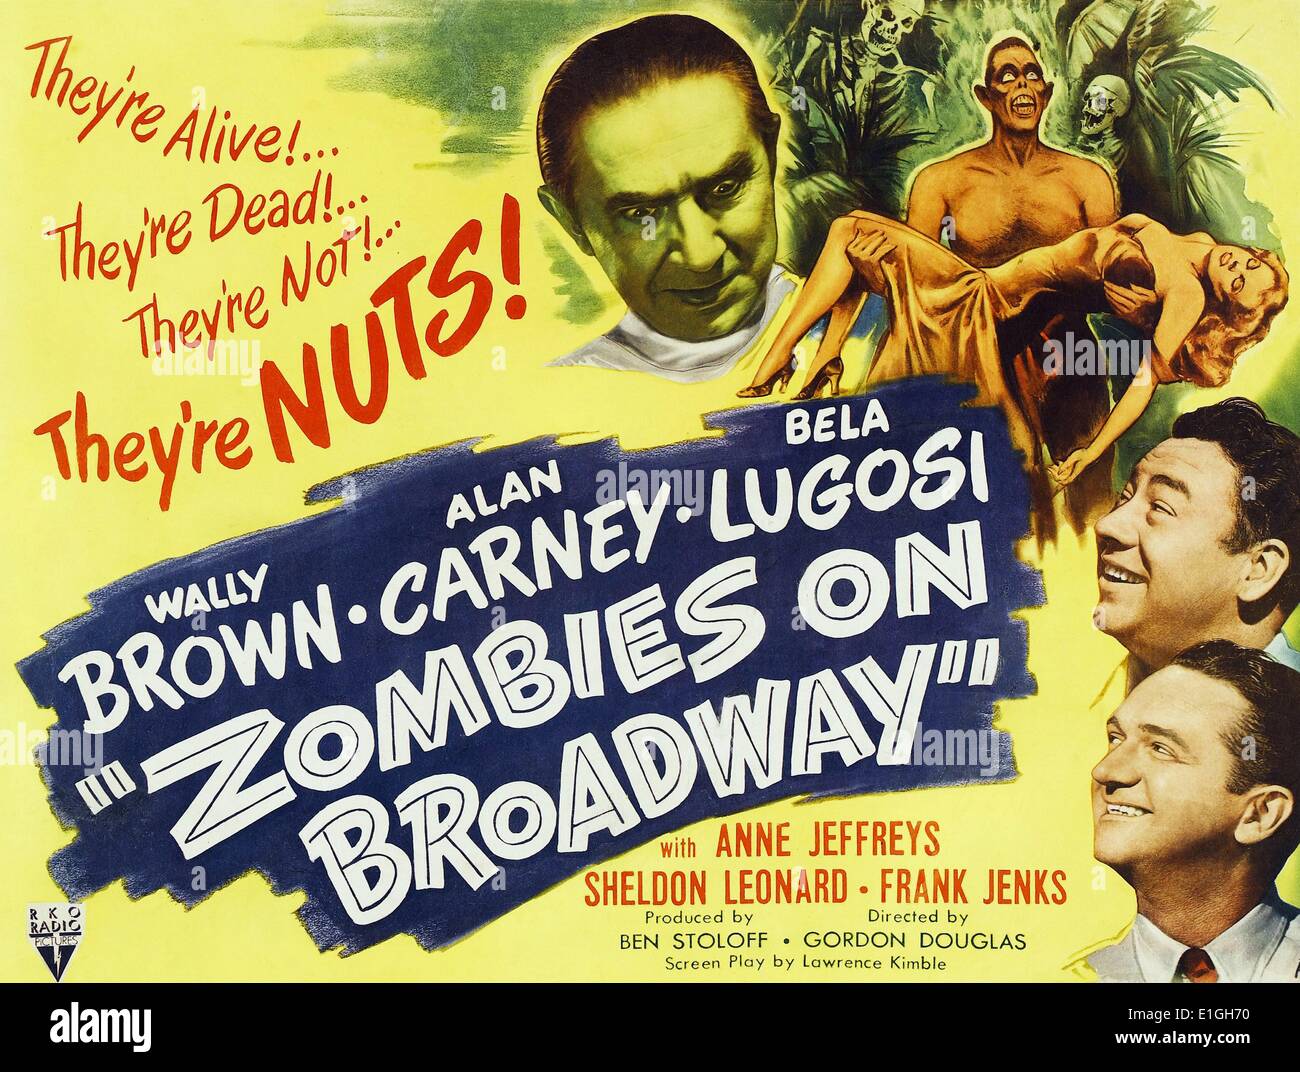 Lobby Card for the film 'Zombies on Broadway' Zombies on Broadway, an American Comedy-horror film released in 1945. Stock Photo